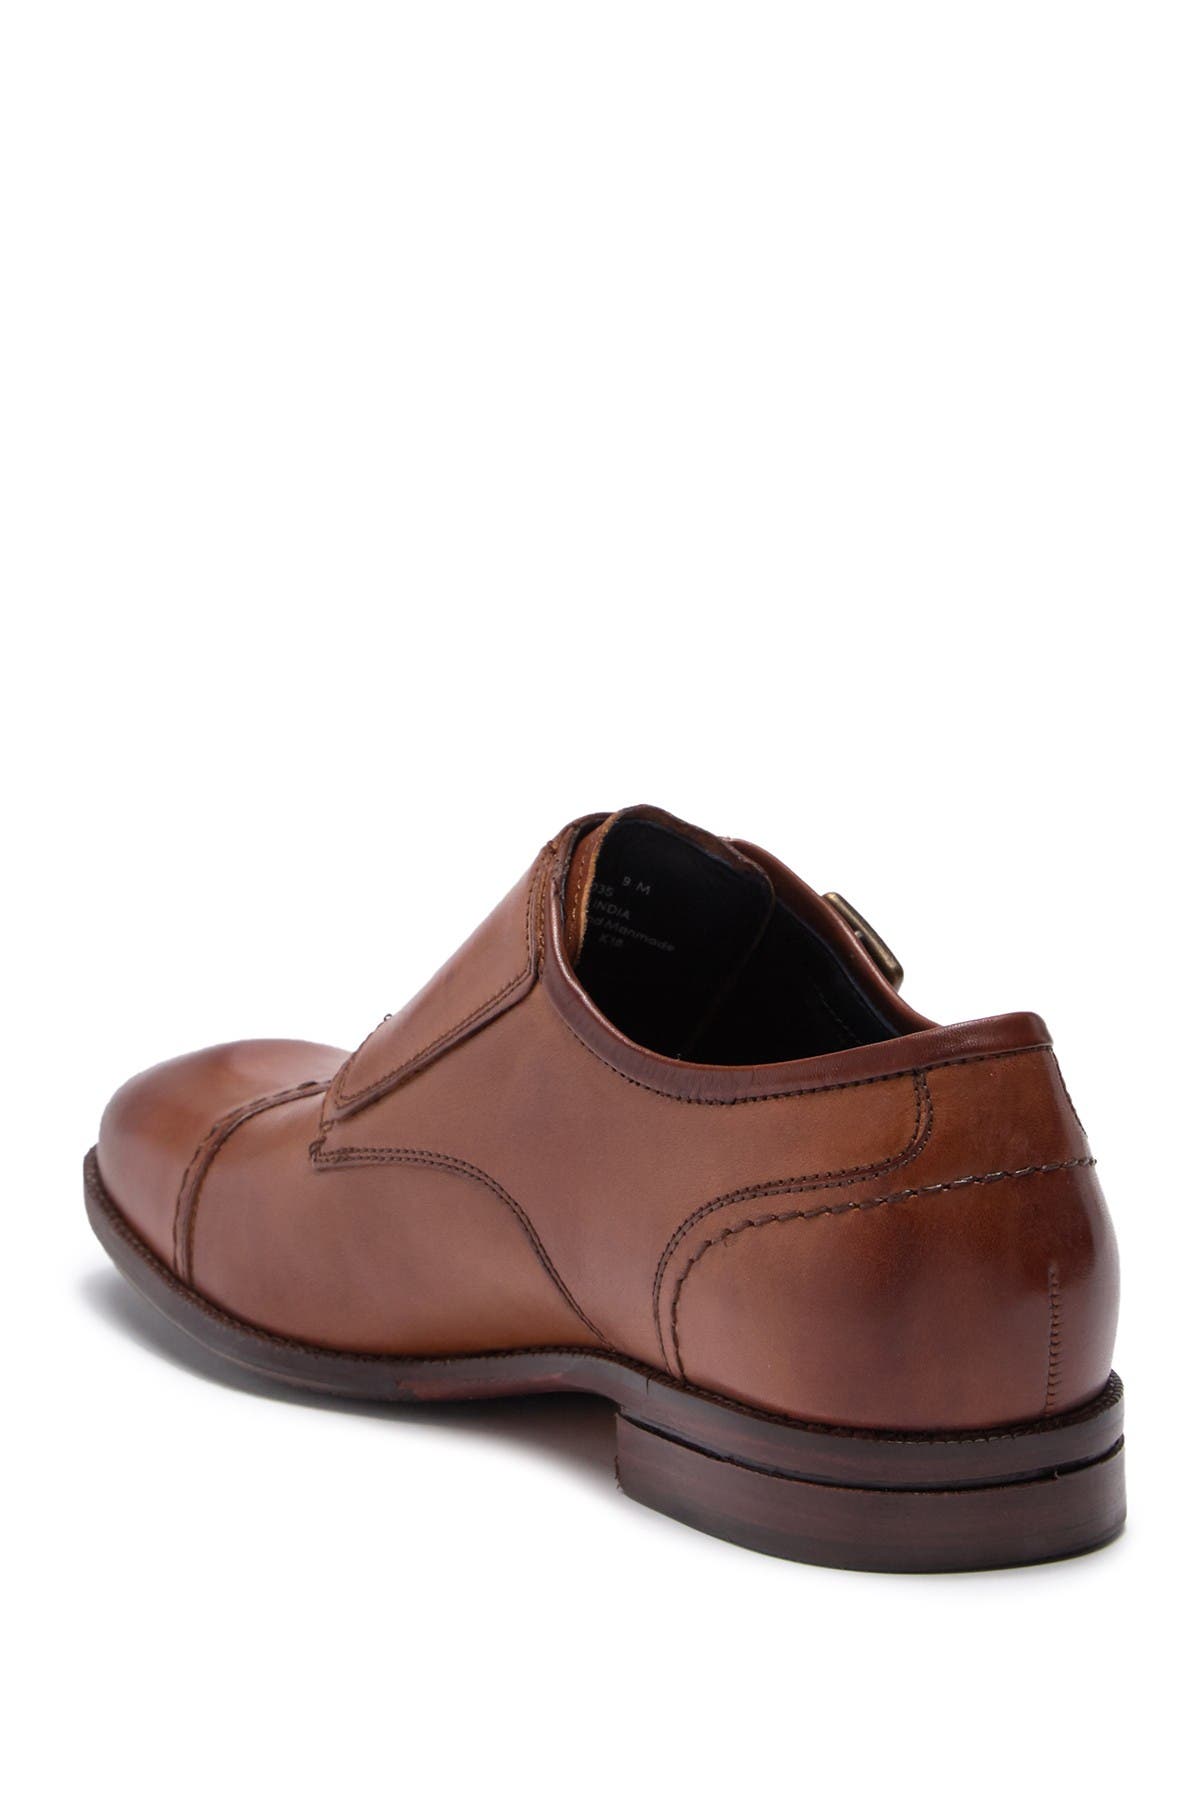 cole haan williams 2. grand monk strap loafer